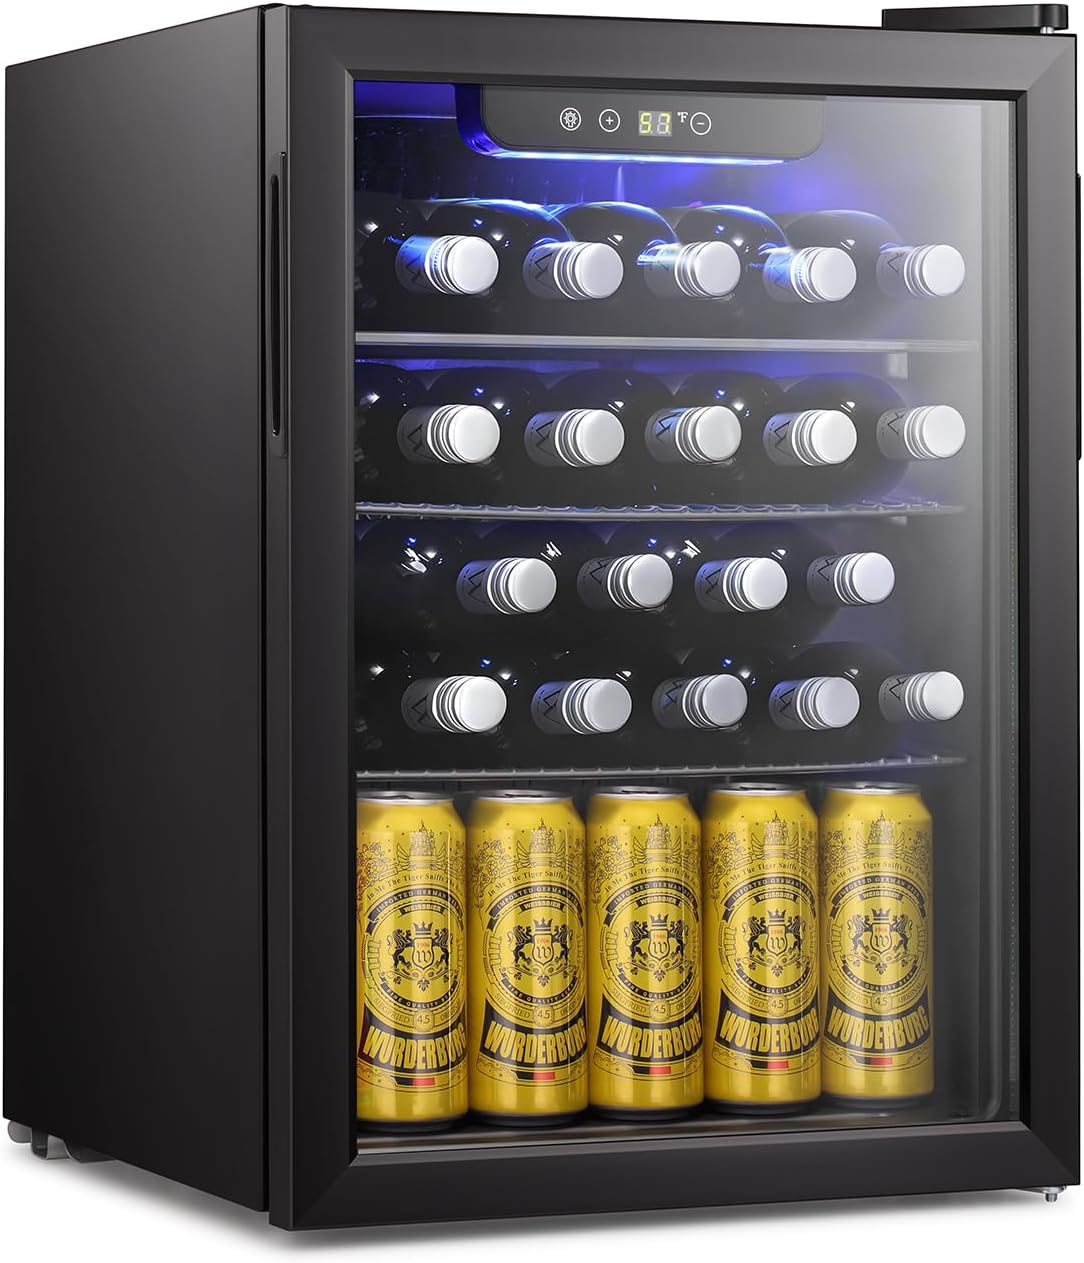 Unlock Your Savings Now! Antarctic Star 24 Bottle Wine Cooler - Limited-Time Specials